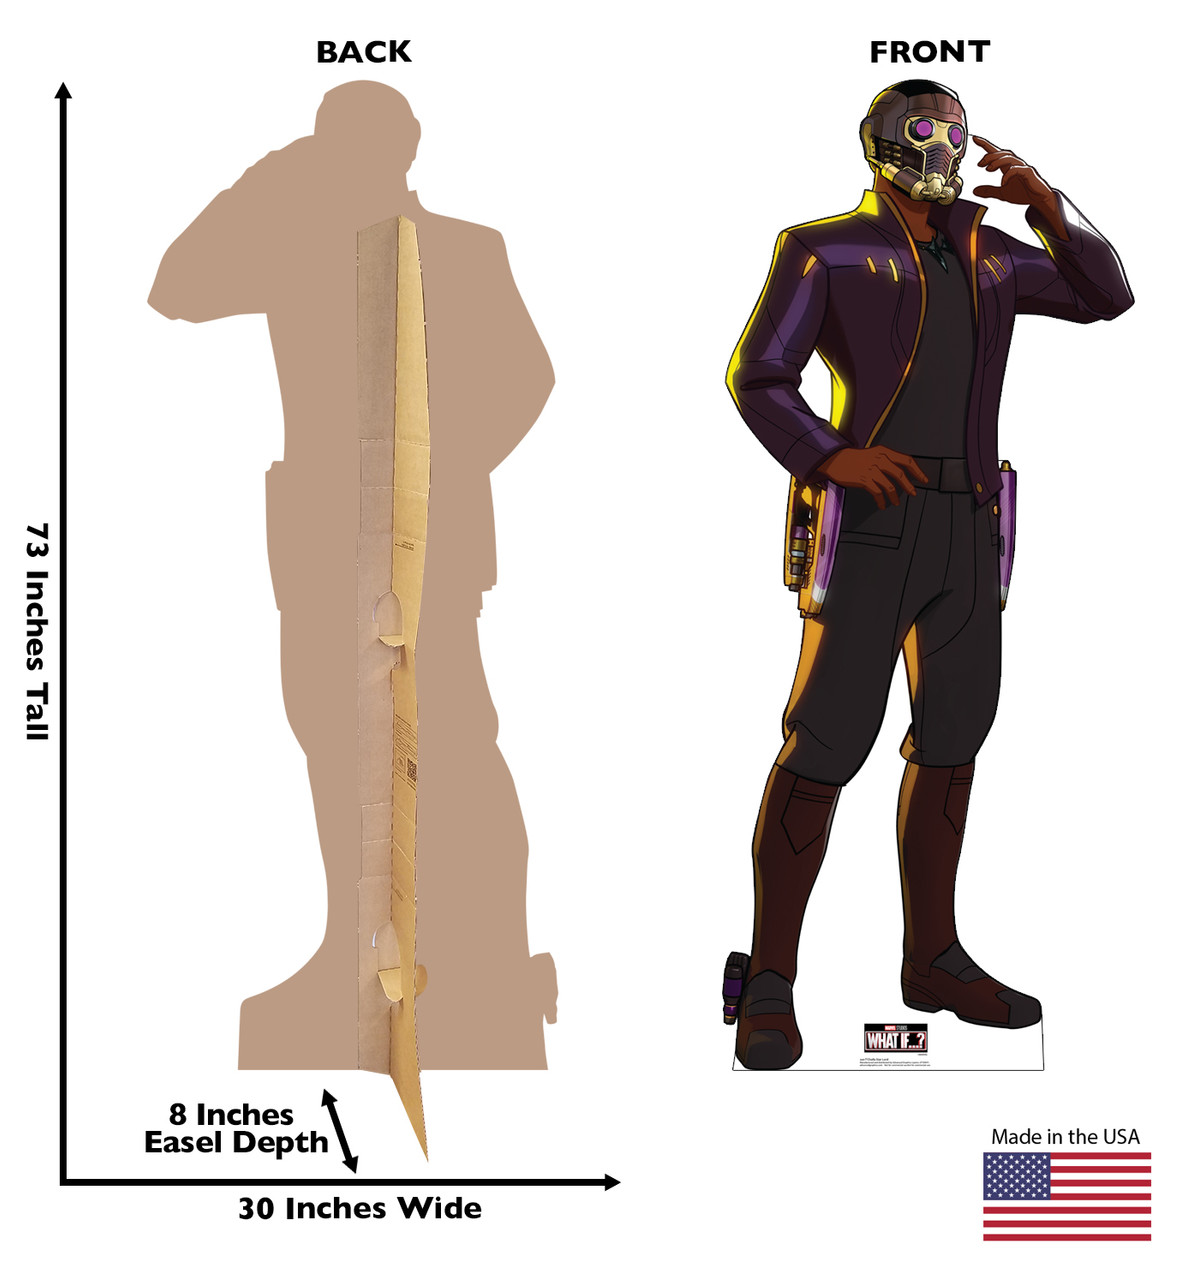 Life-size cardboard standee of T'Challa Star-Lord from Marvel Studios What if? on Disney + with front and back dimensions.